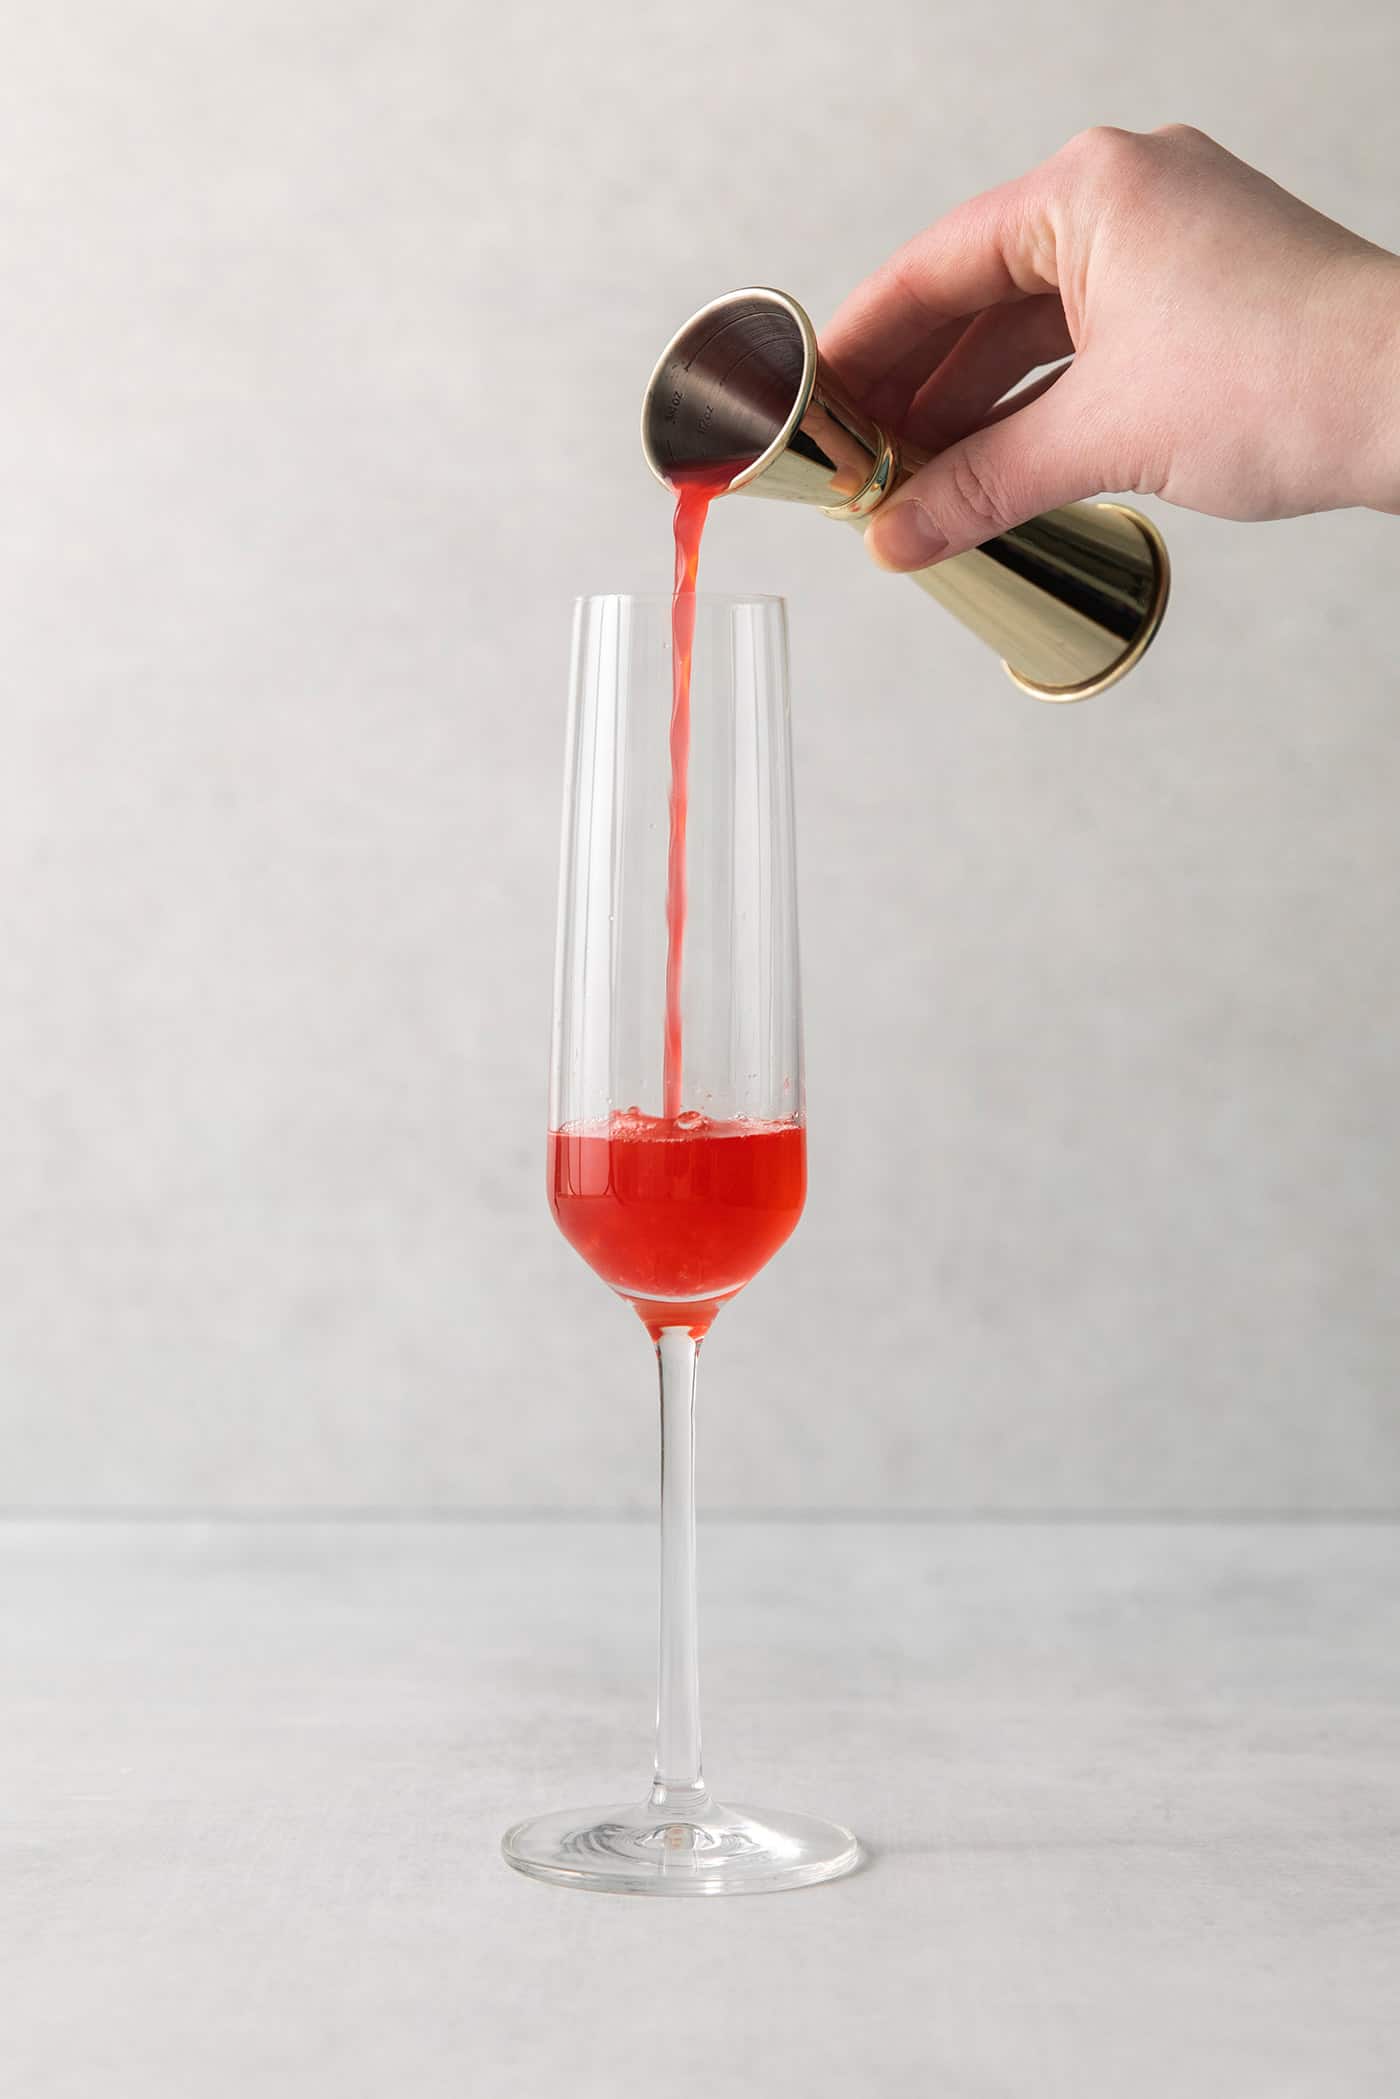 Blood orange juice being poured into a champagne flute